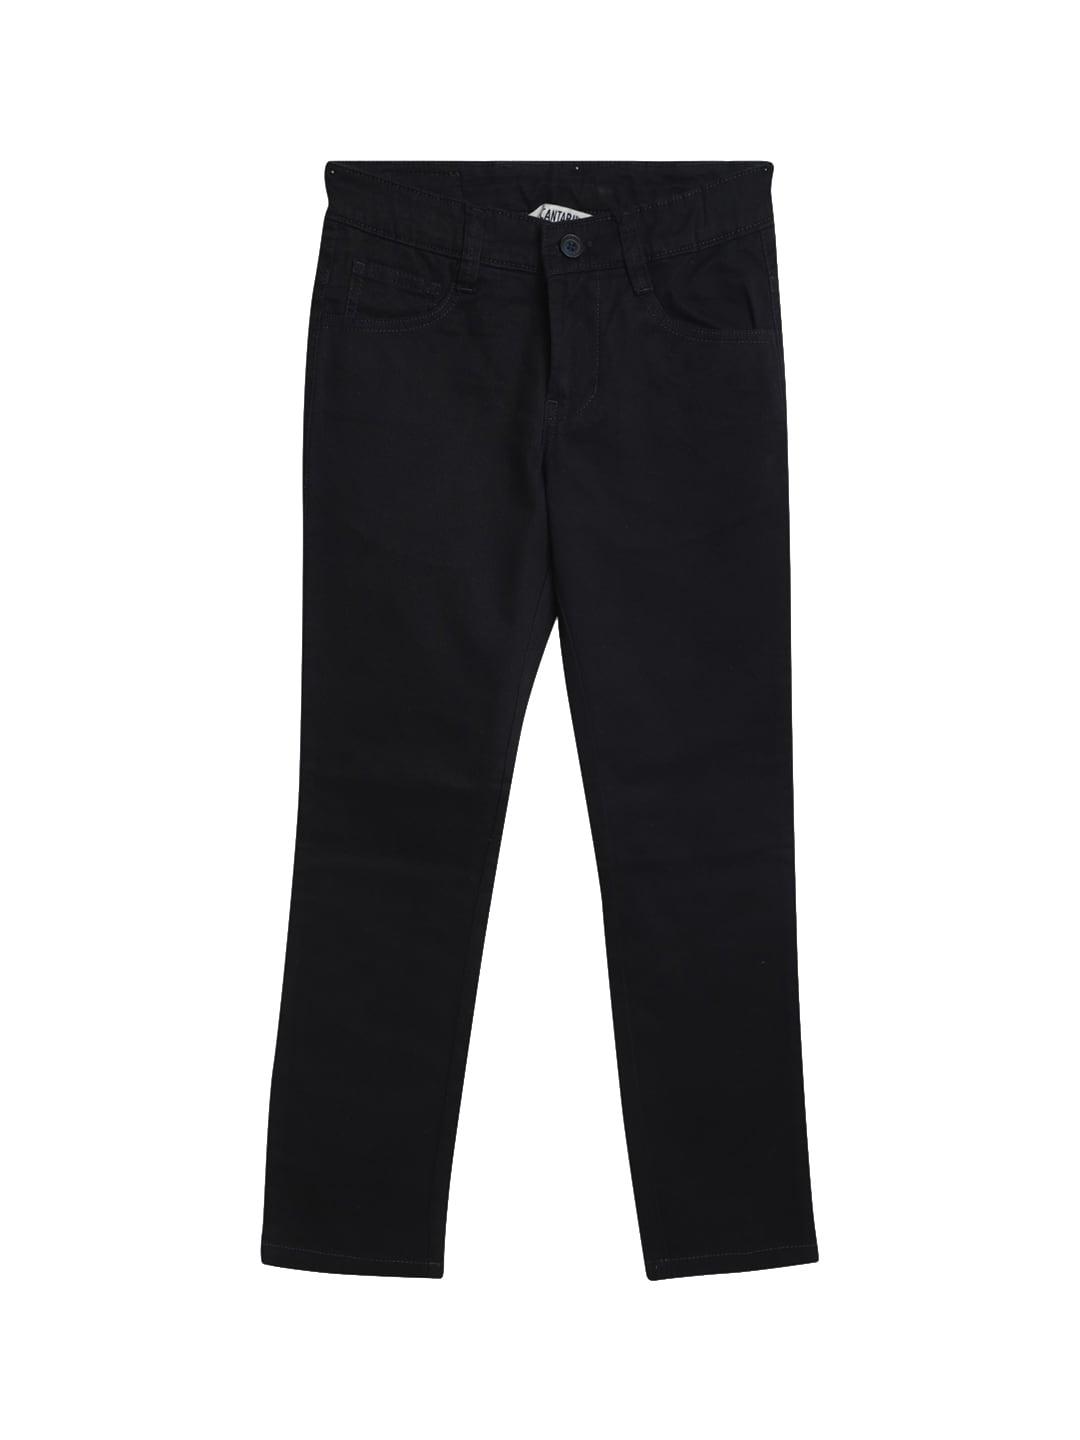 cantabil-boys-mid-rise-cotton-chinos